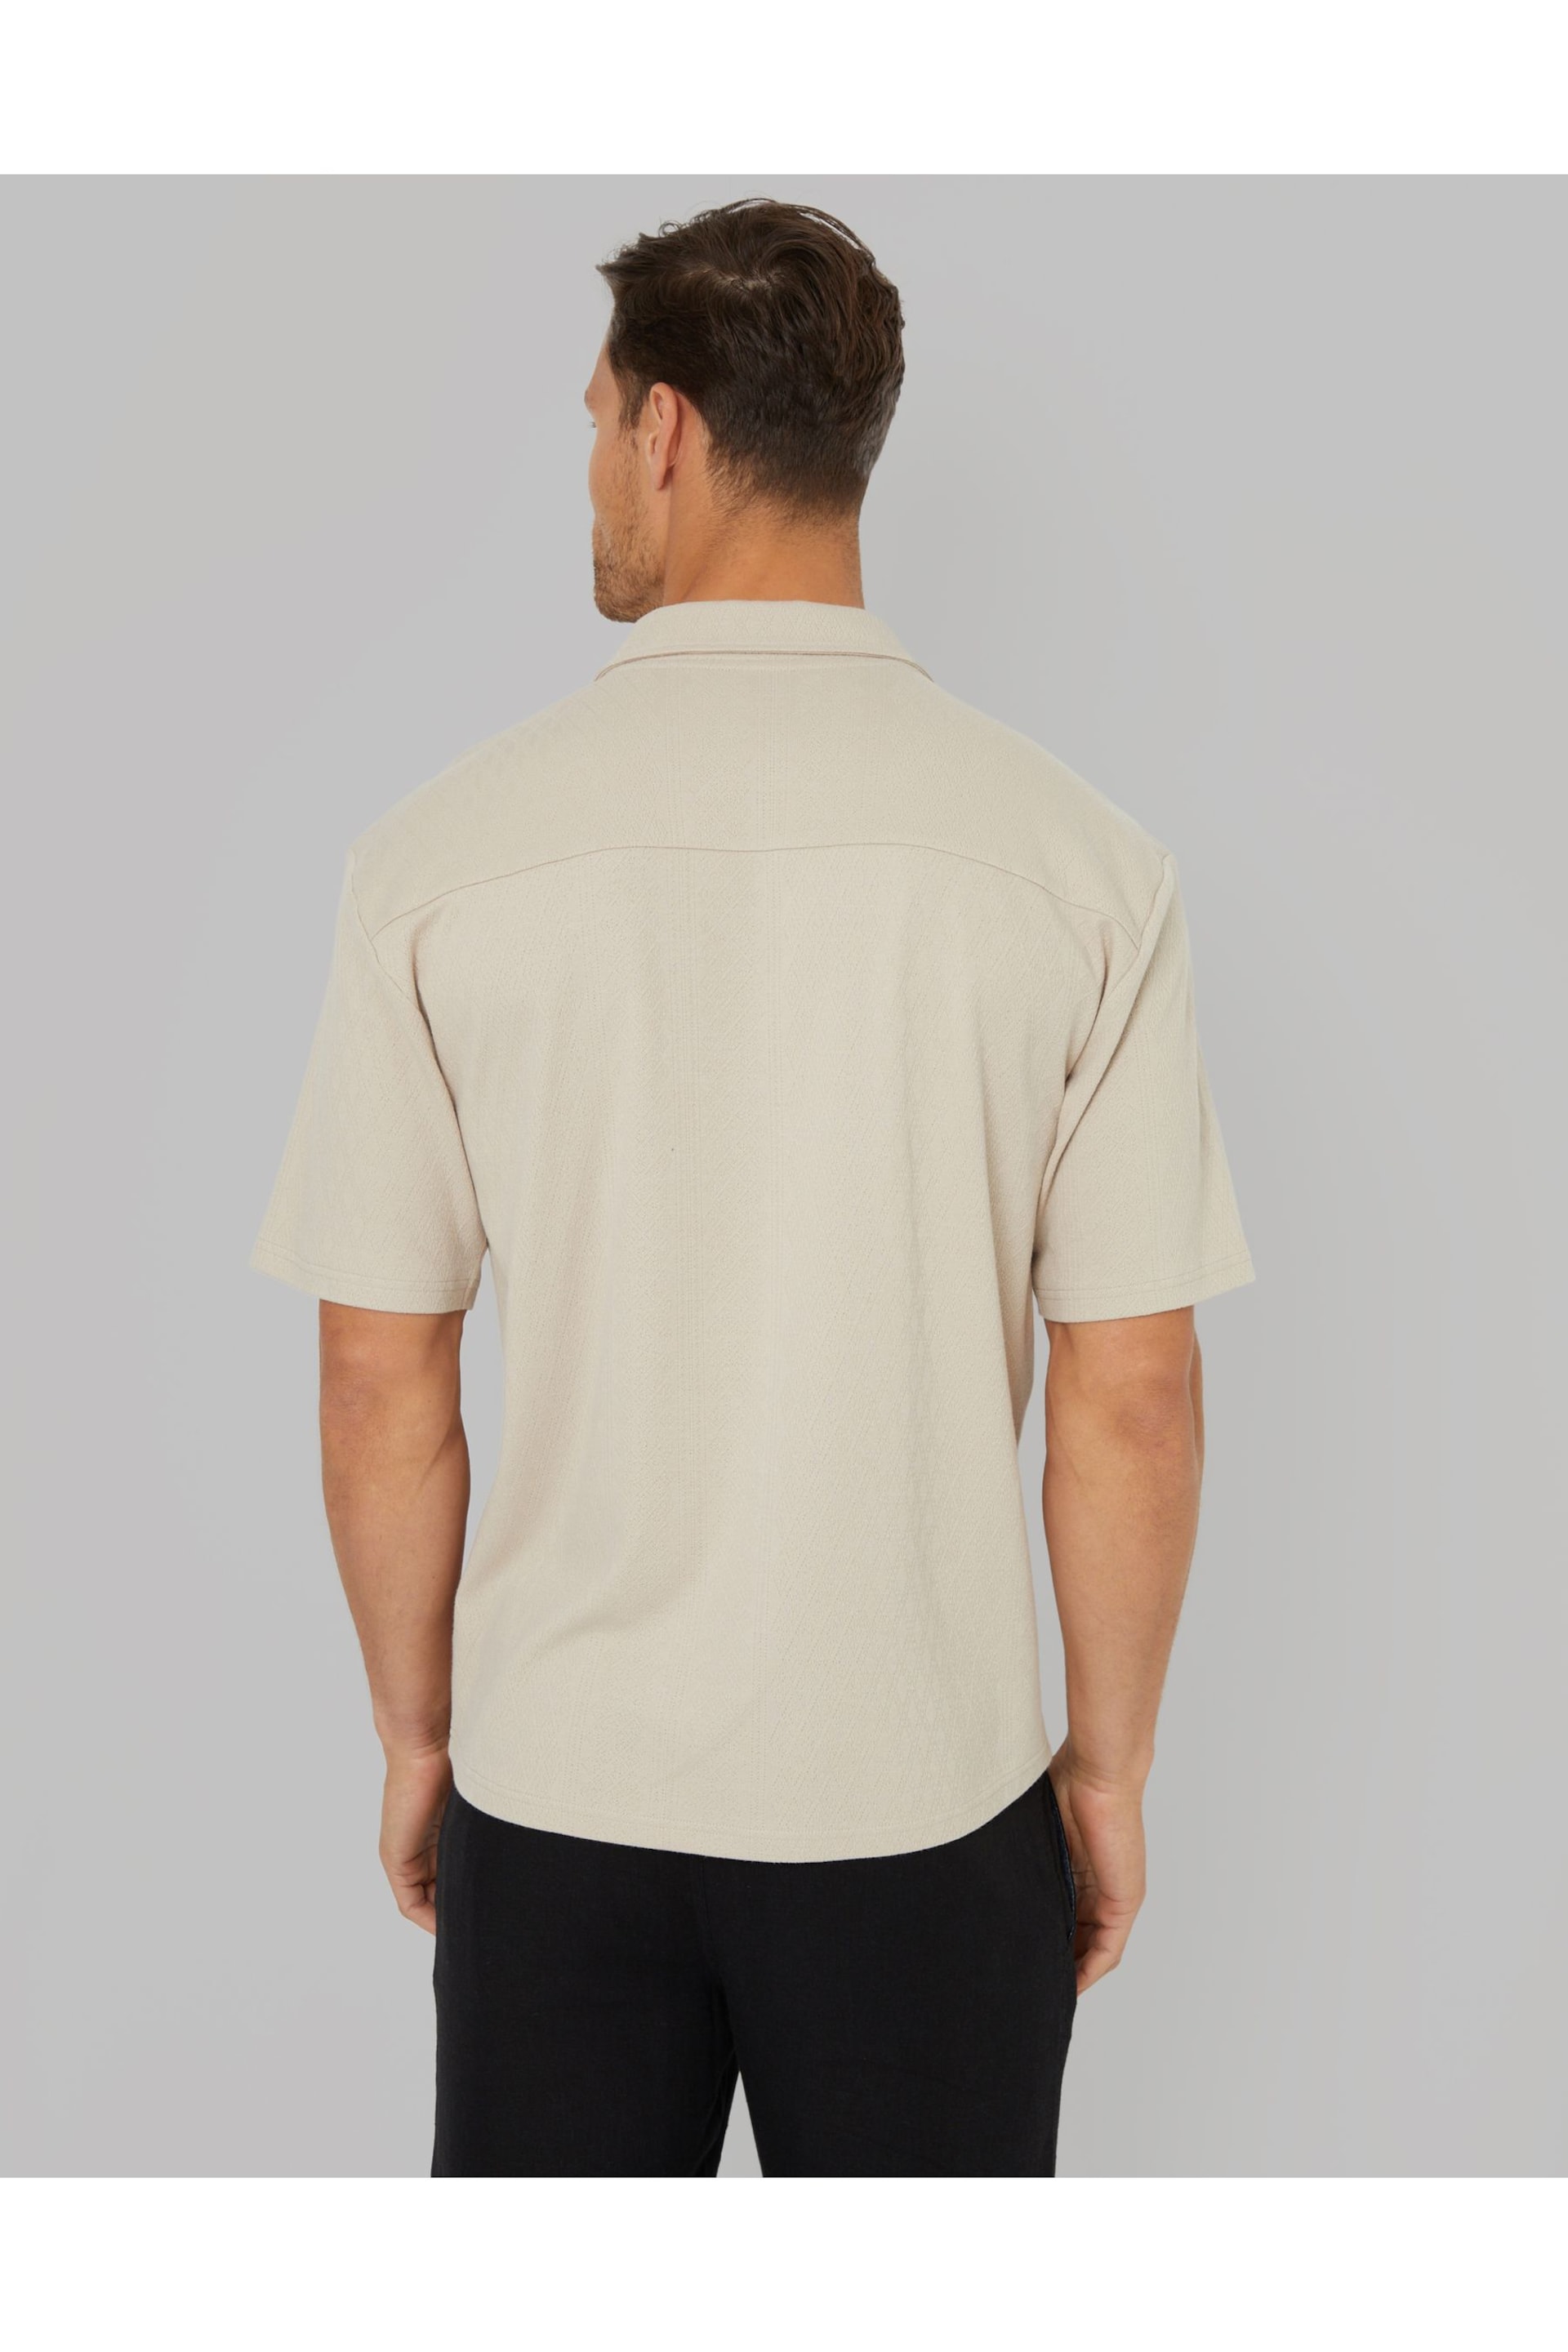 Threadbare Stone Textured Short Sleeve Cotton Shirt With Stretch - Image 2 of 4